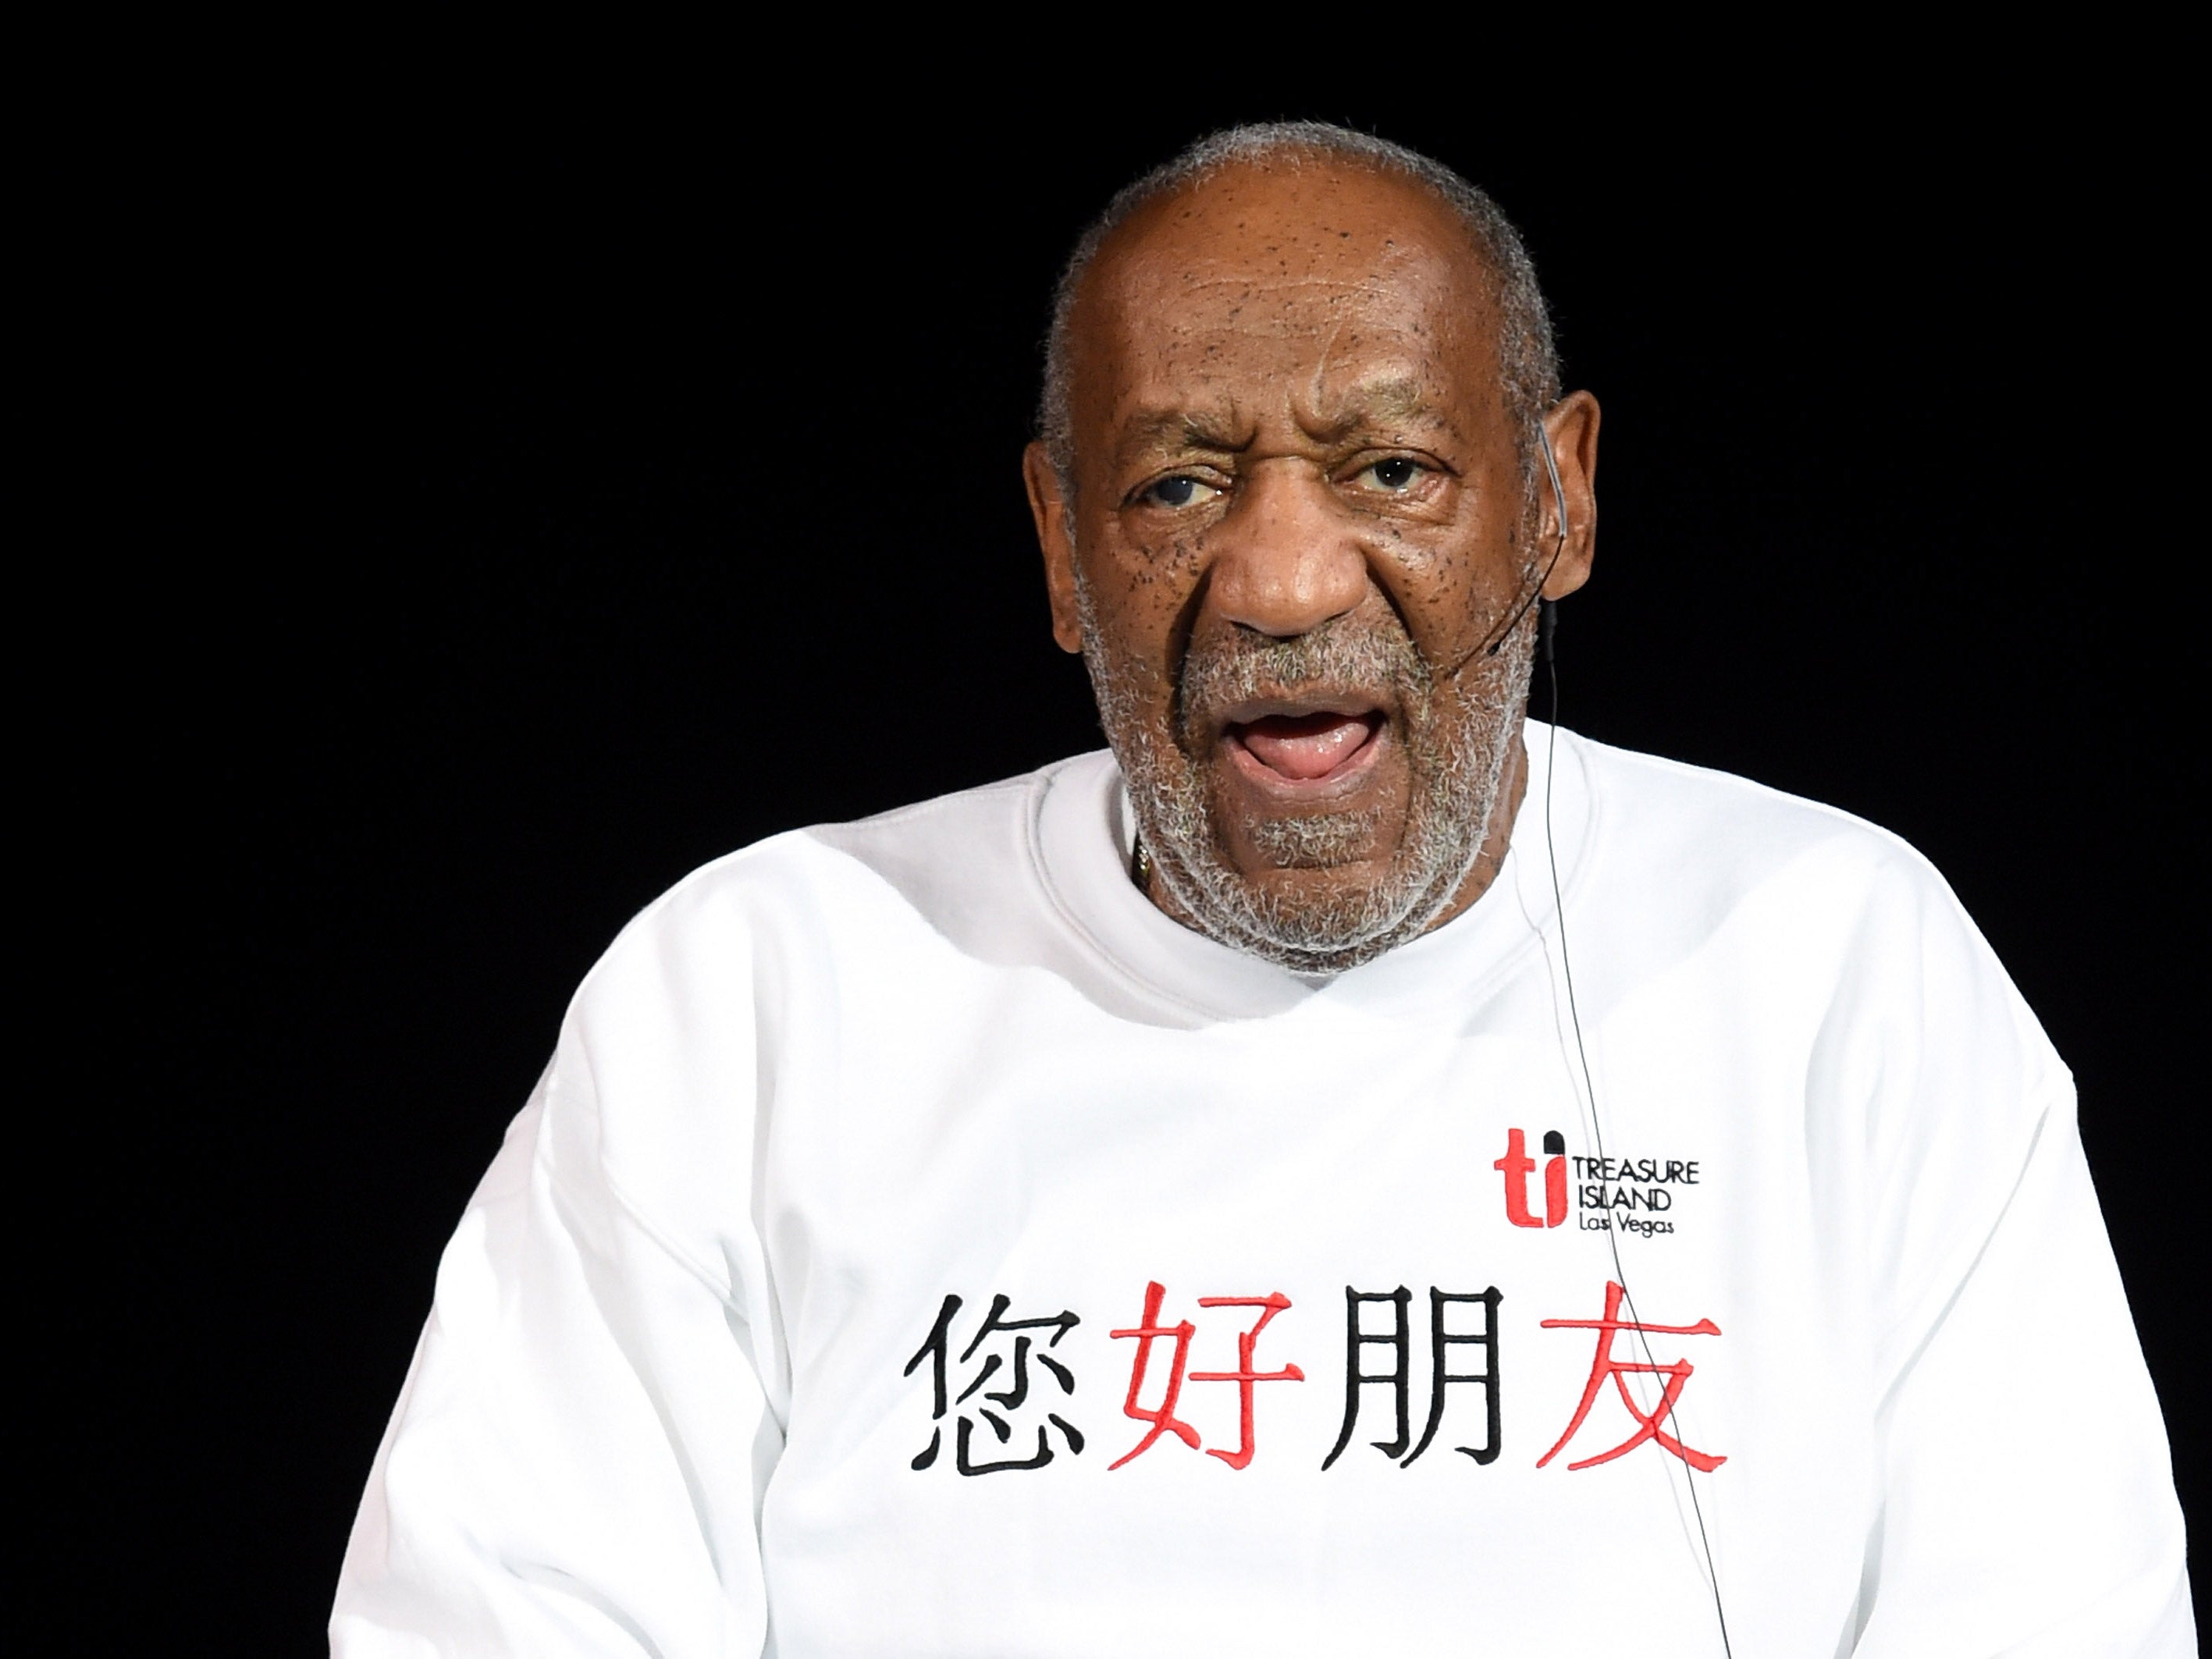 Cosby is accused of sexually assaulting a 15-year-old girl at the Playboy Mansion